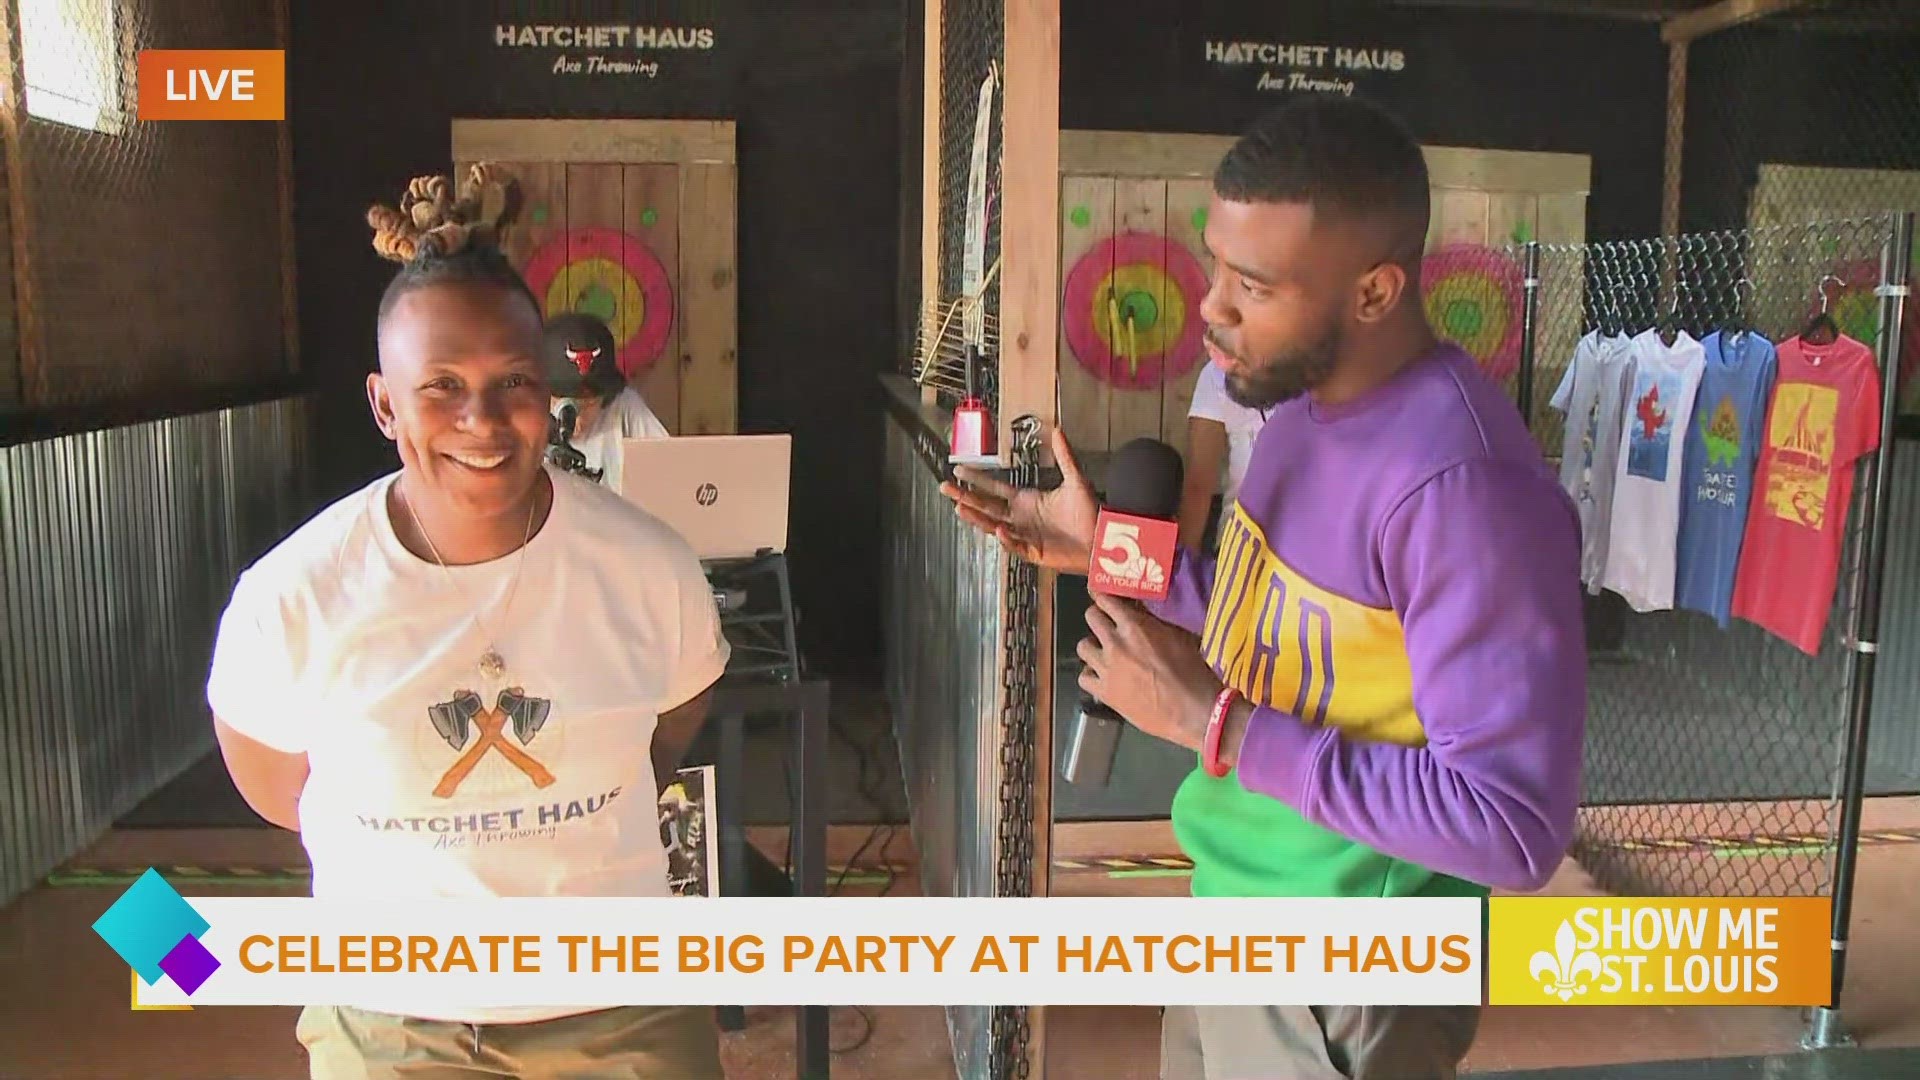 Hatchet Haus is a unique amusement facility that offers an unrivaled experience in the thrilling sport of axe throwing.